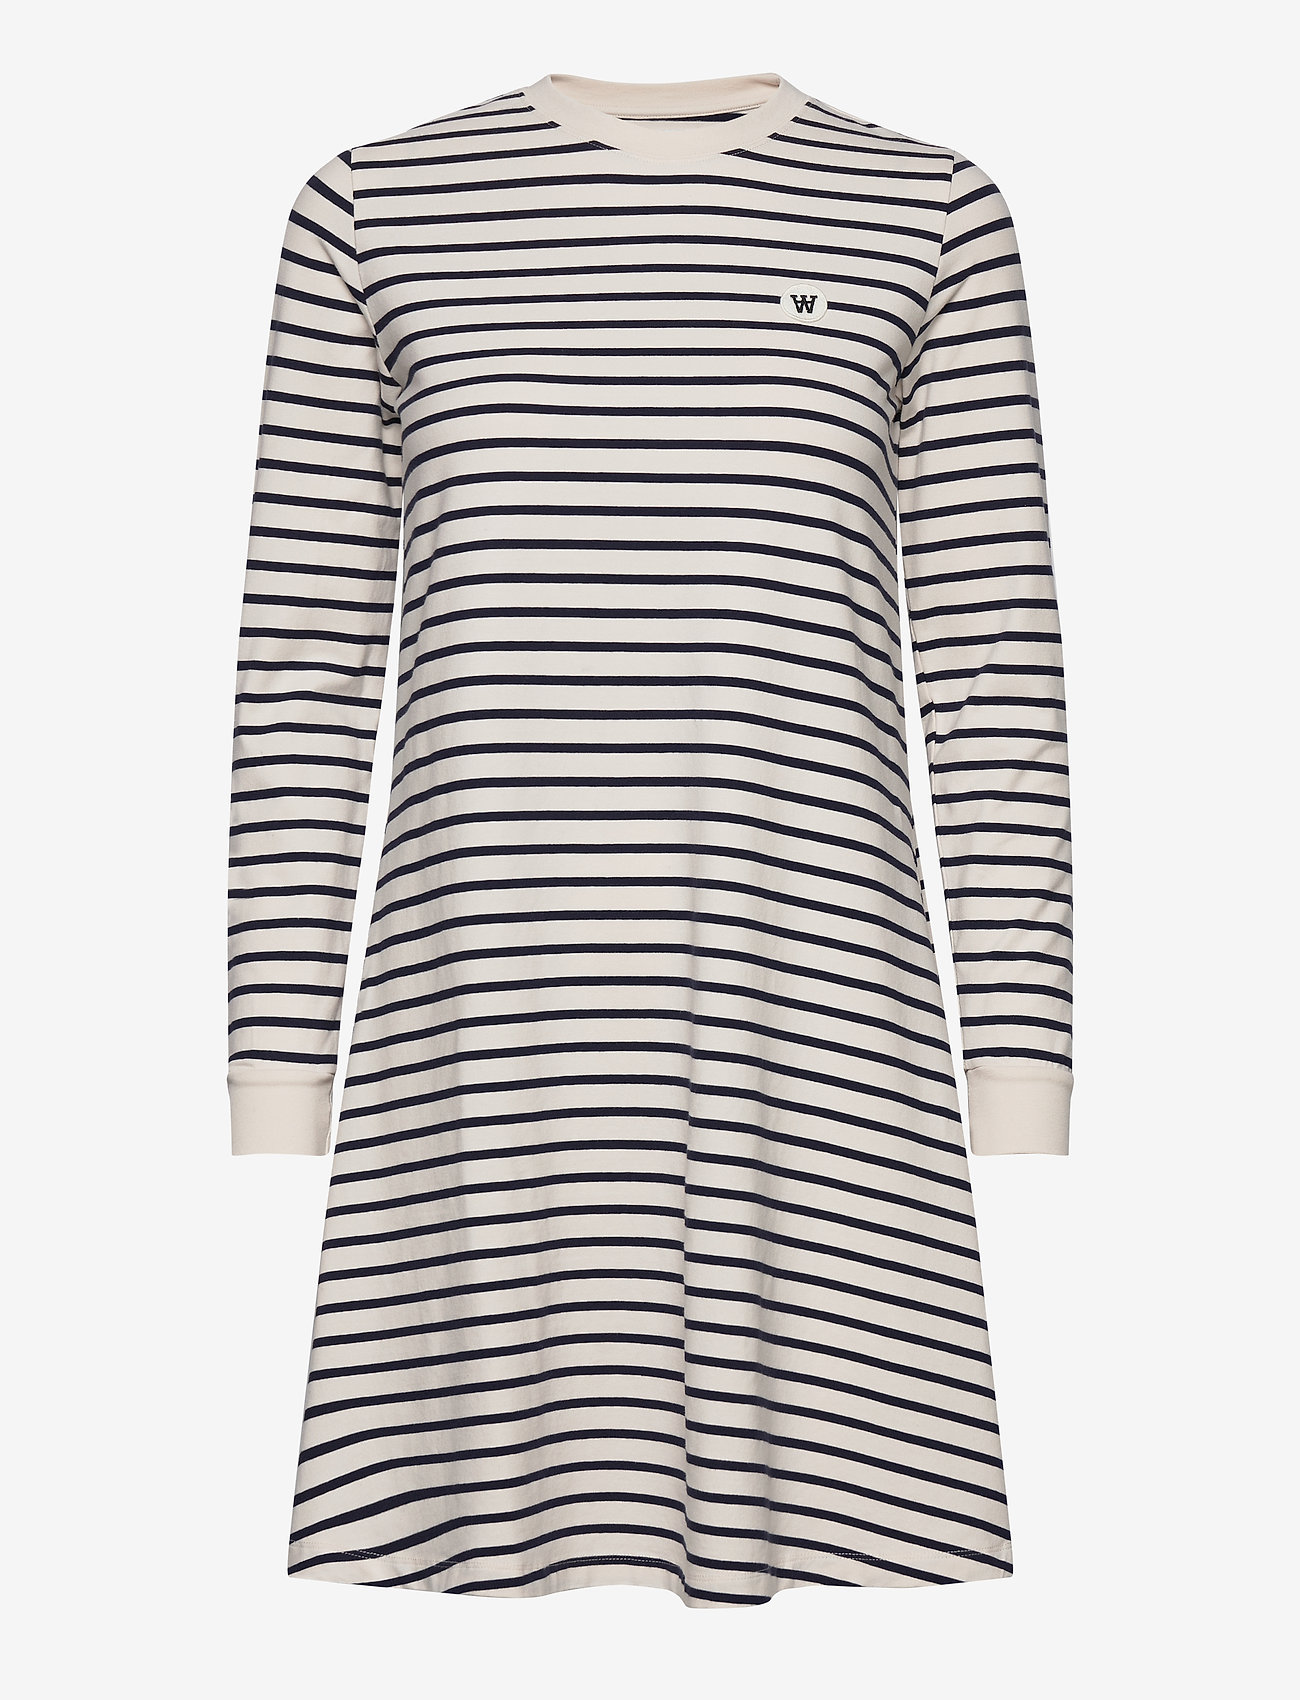 Double A by Wood Wood - Isa dress - dresskleidid - off-white/navy stripes - 0